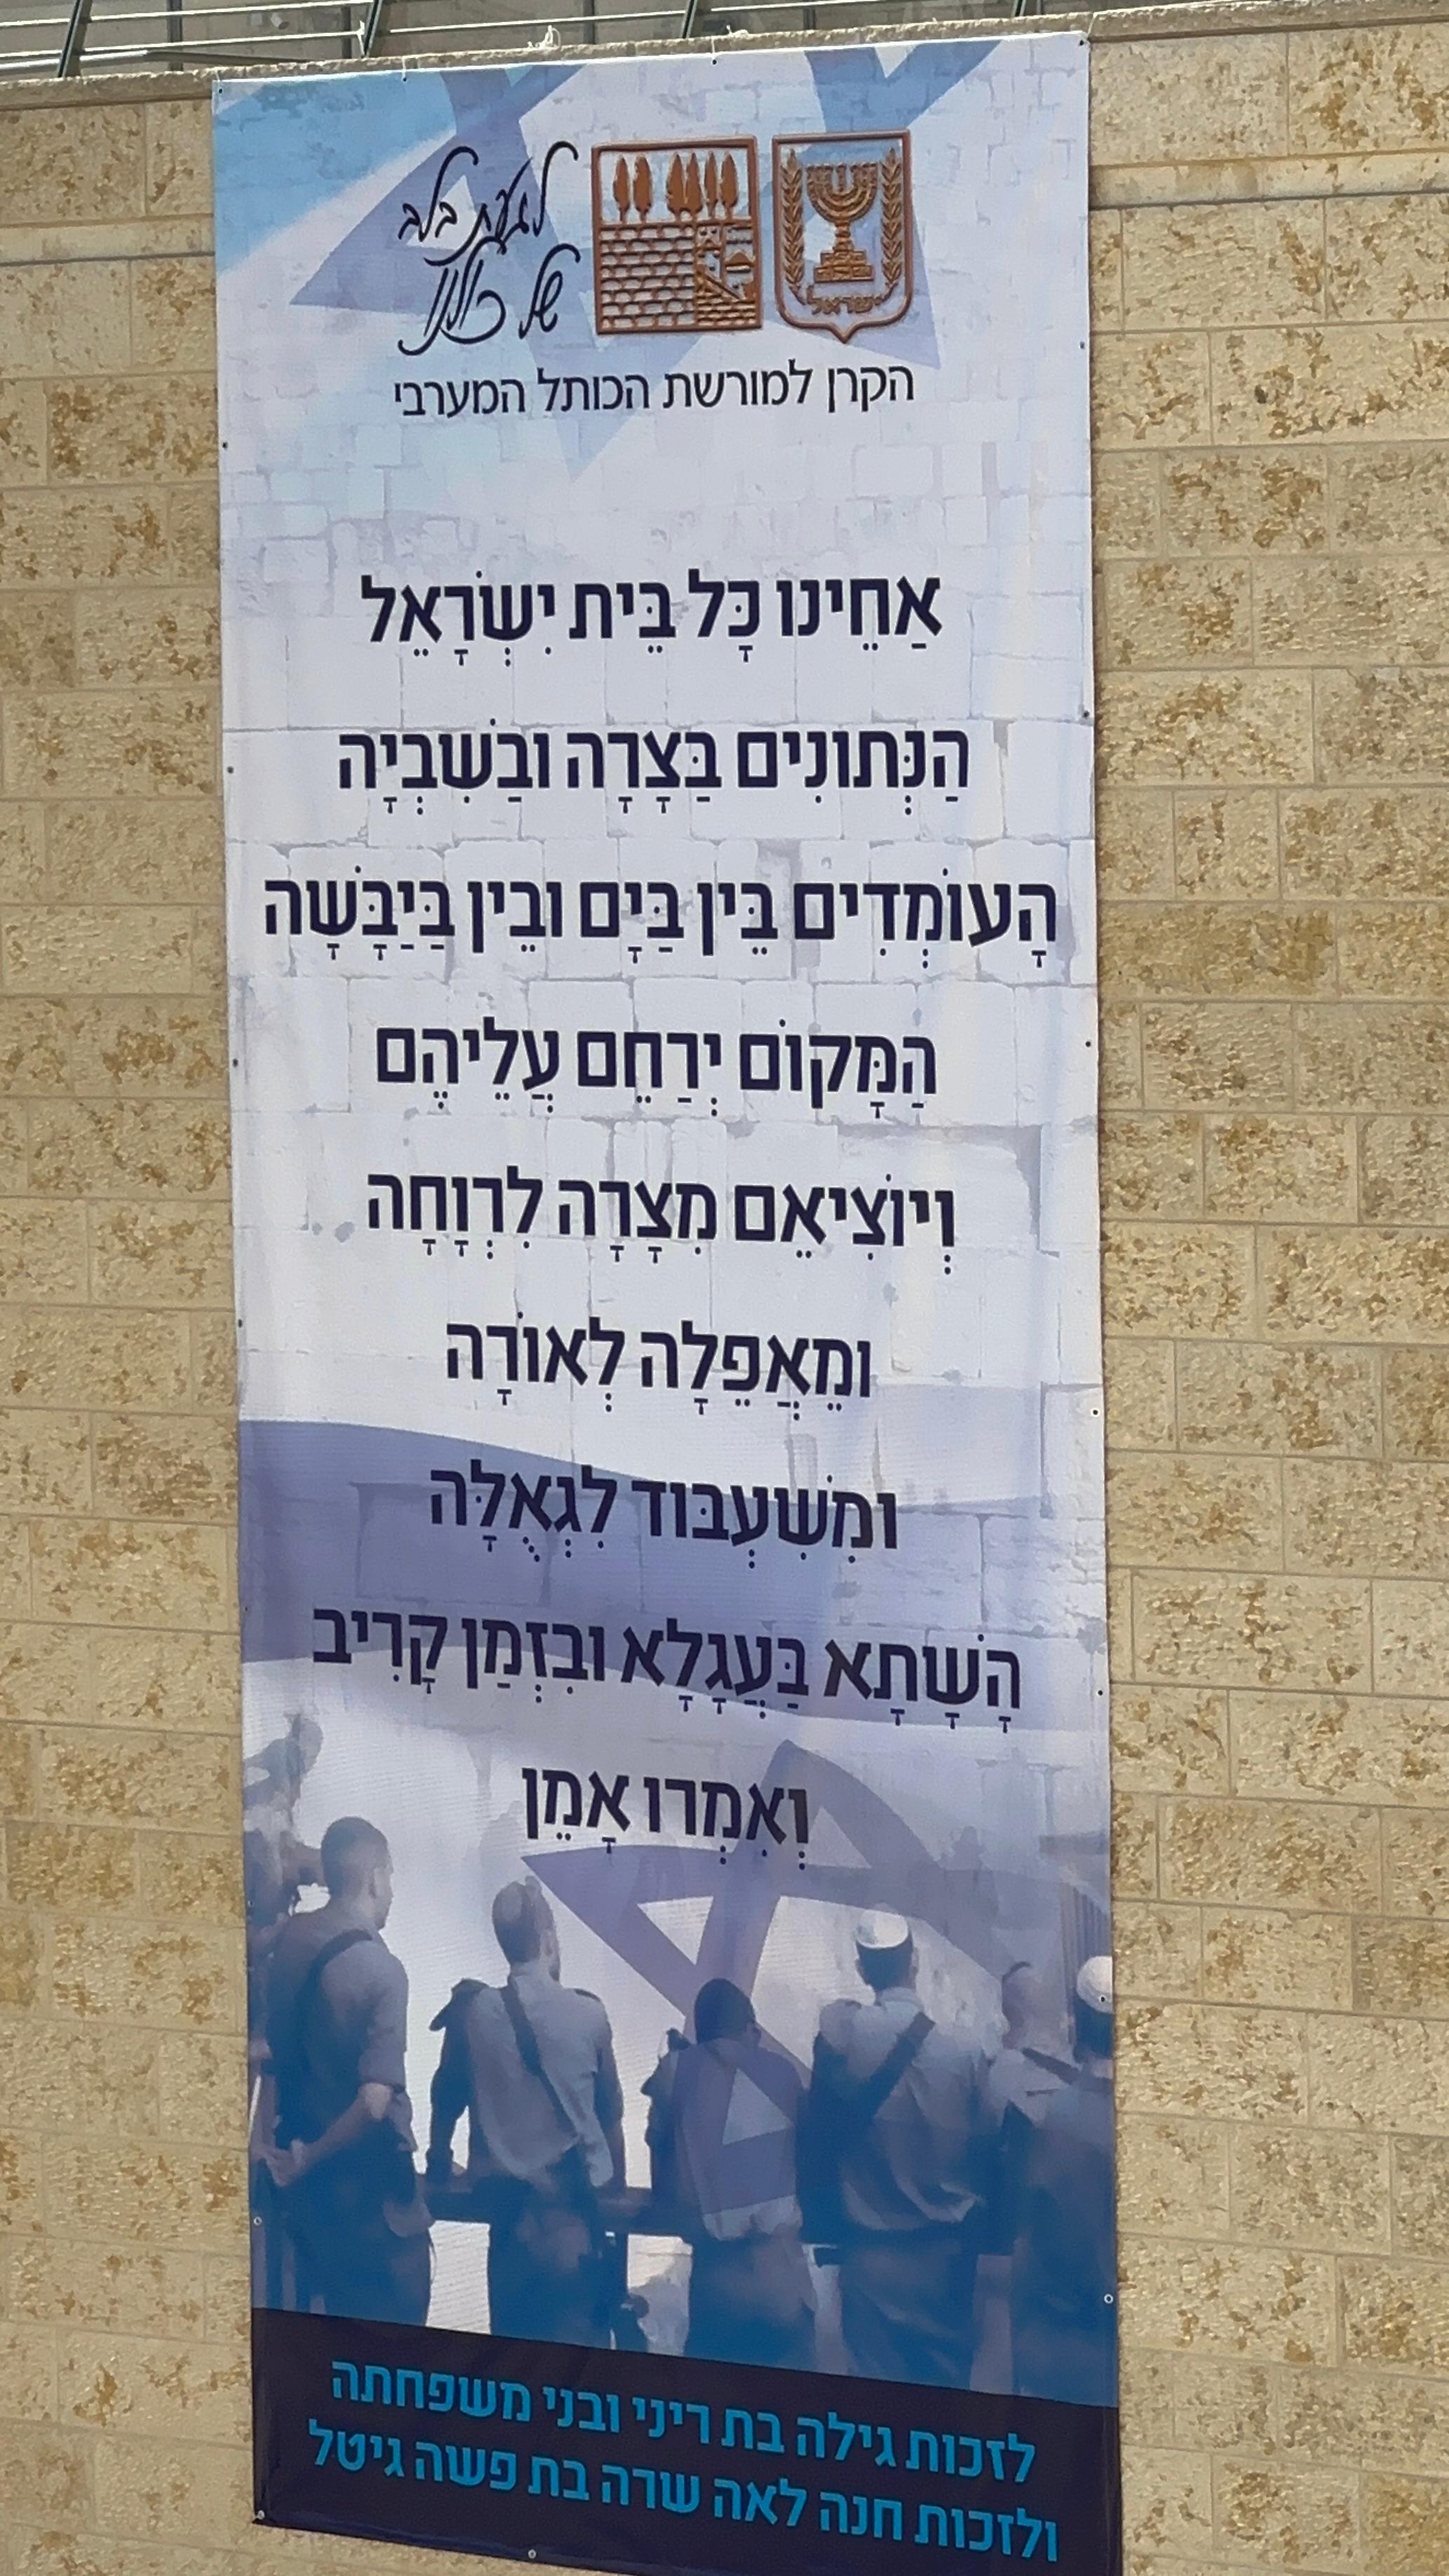  A view of the sign containing the prayer for the safety of IDF soldiers and members of the security forces fighting in Operation Swords of Iron (The Western Wall Heritage Foundation)